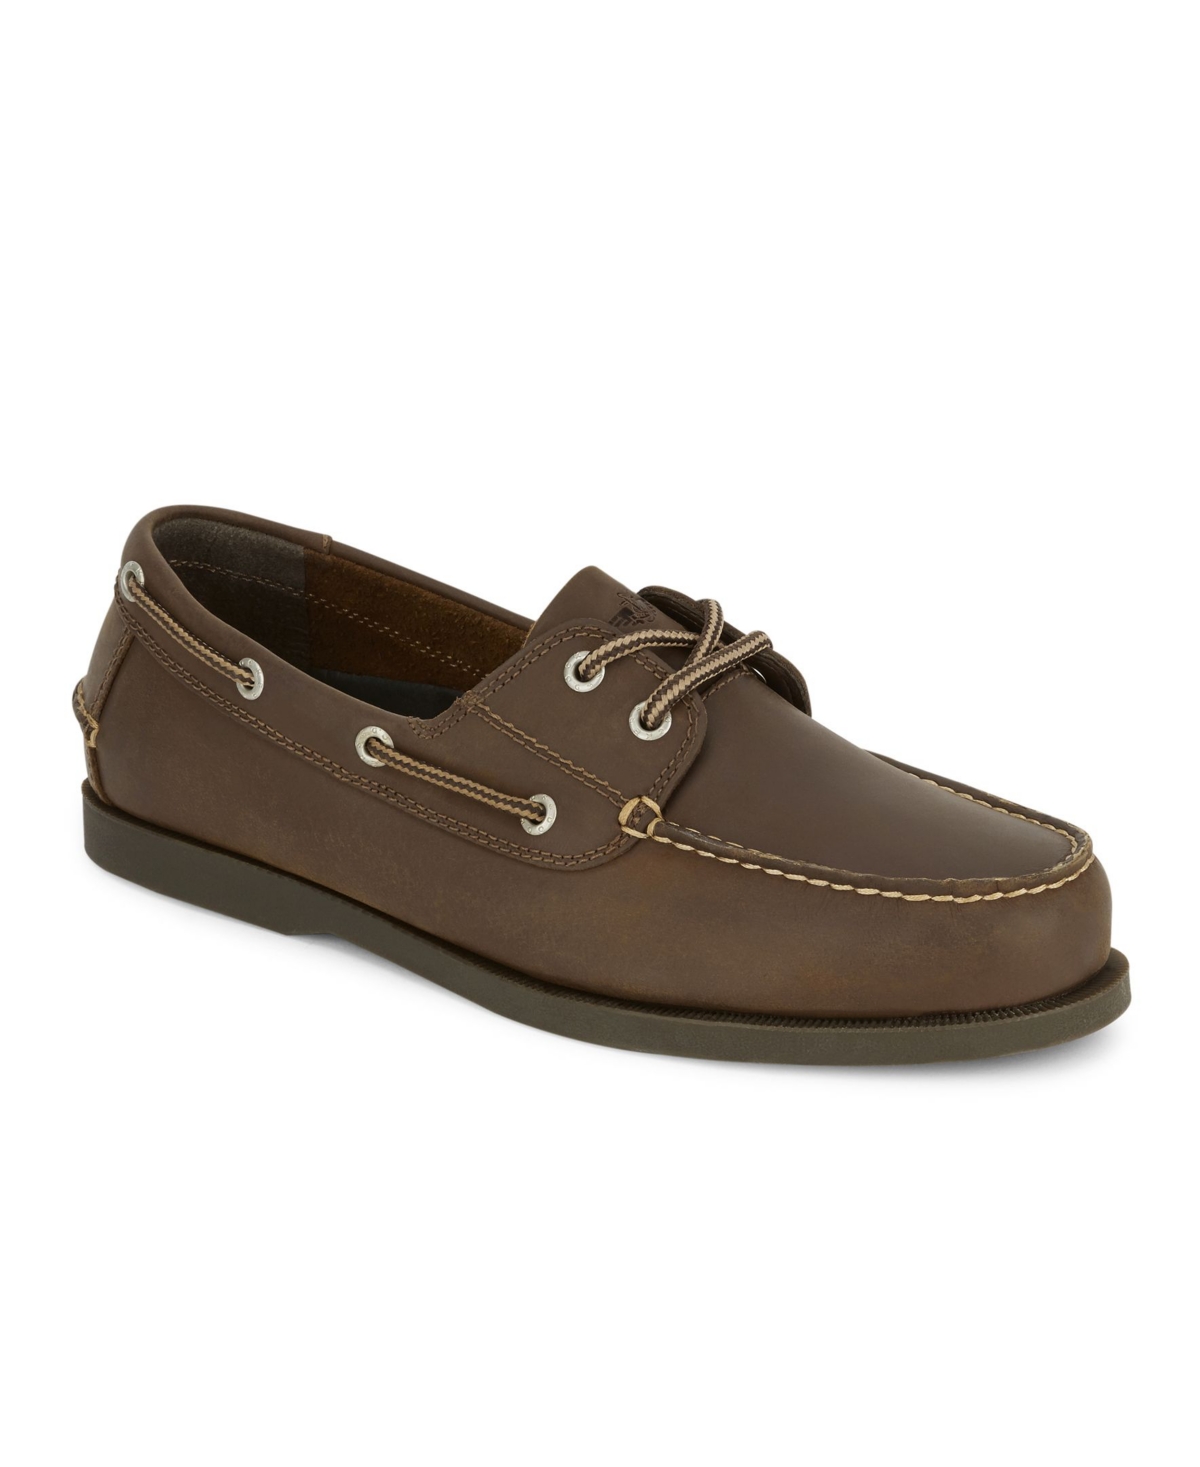 Men's Vargas Casual Boat Shoes - Rust